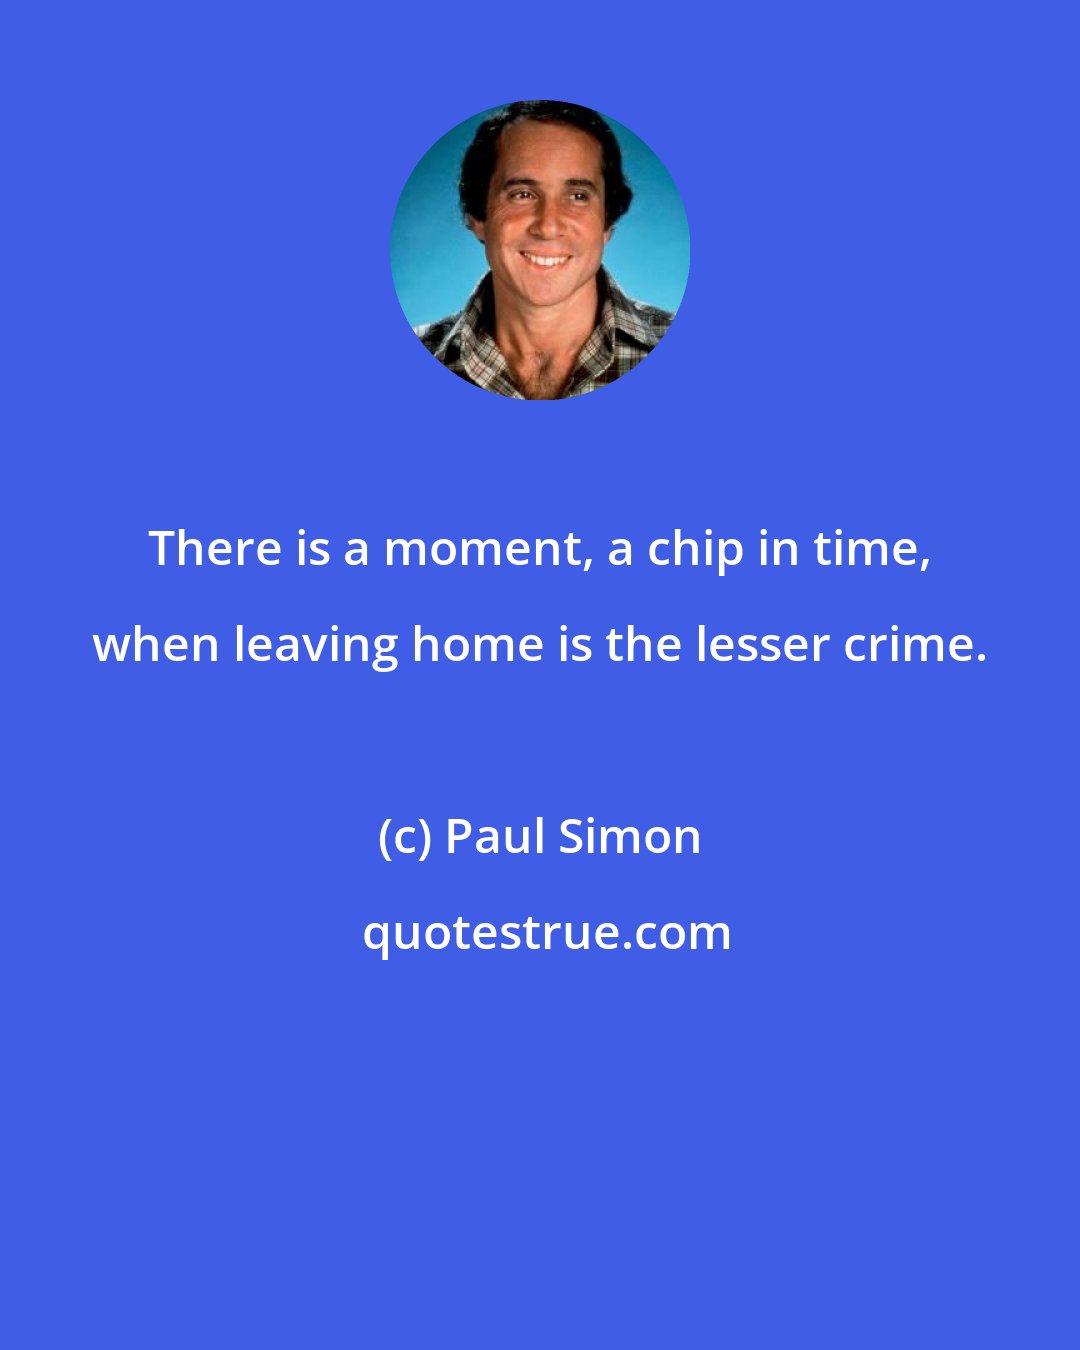 Paul Simon: There is a moment, a chip in time, when leaving home is the lesser crime.